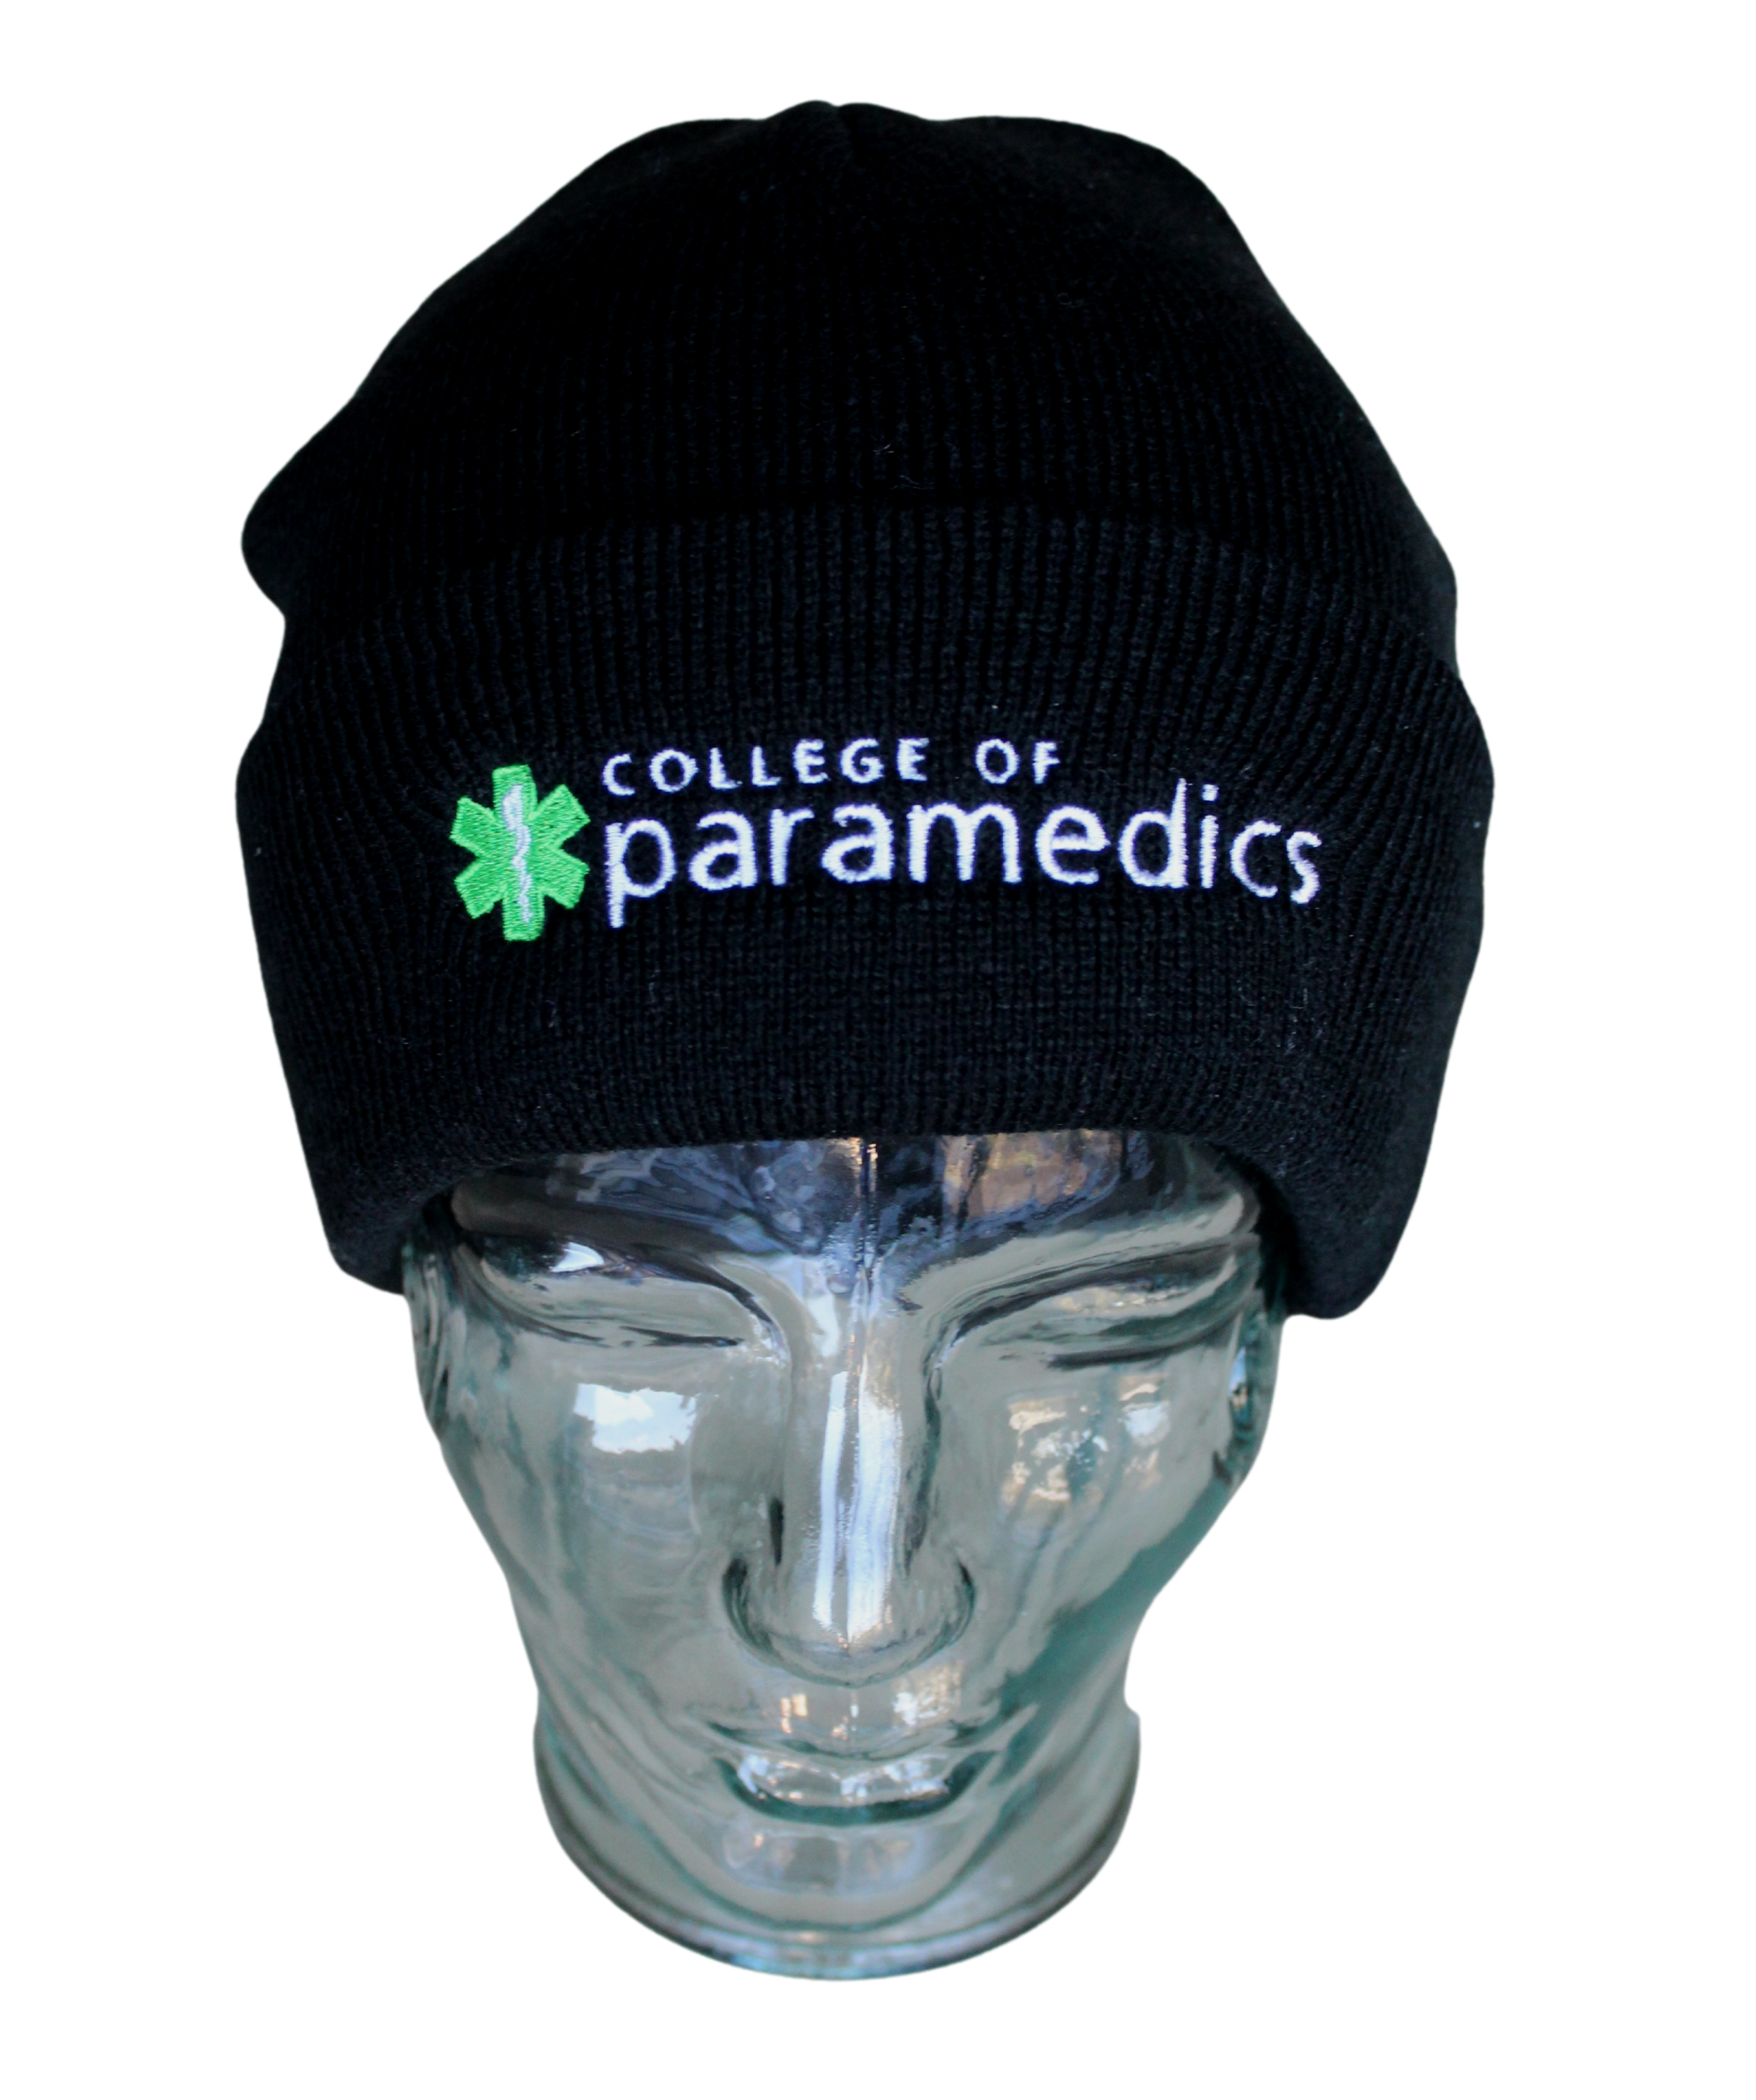 College of Paramedics Beanie Hat - Knitted Turn-up Black